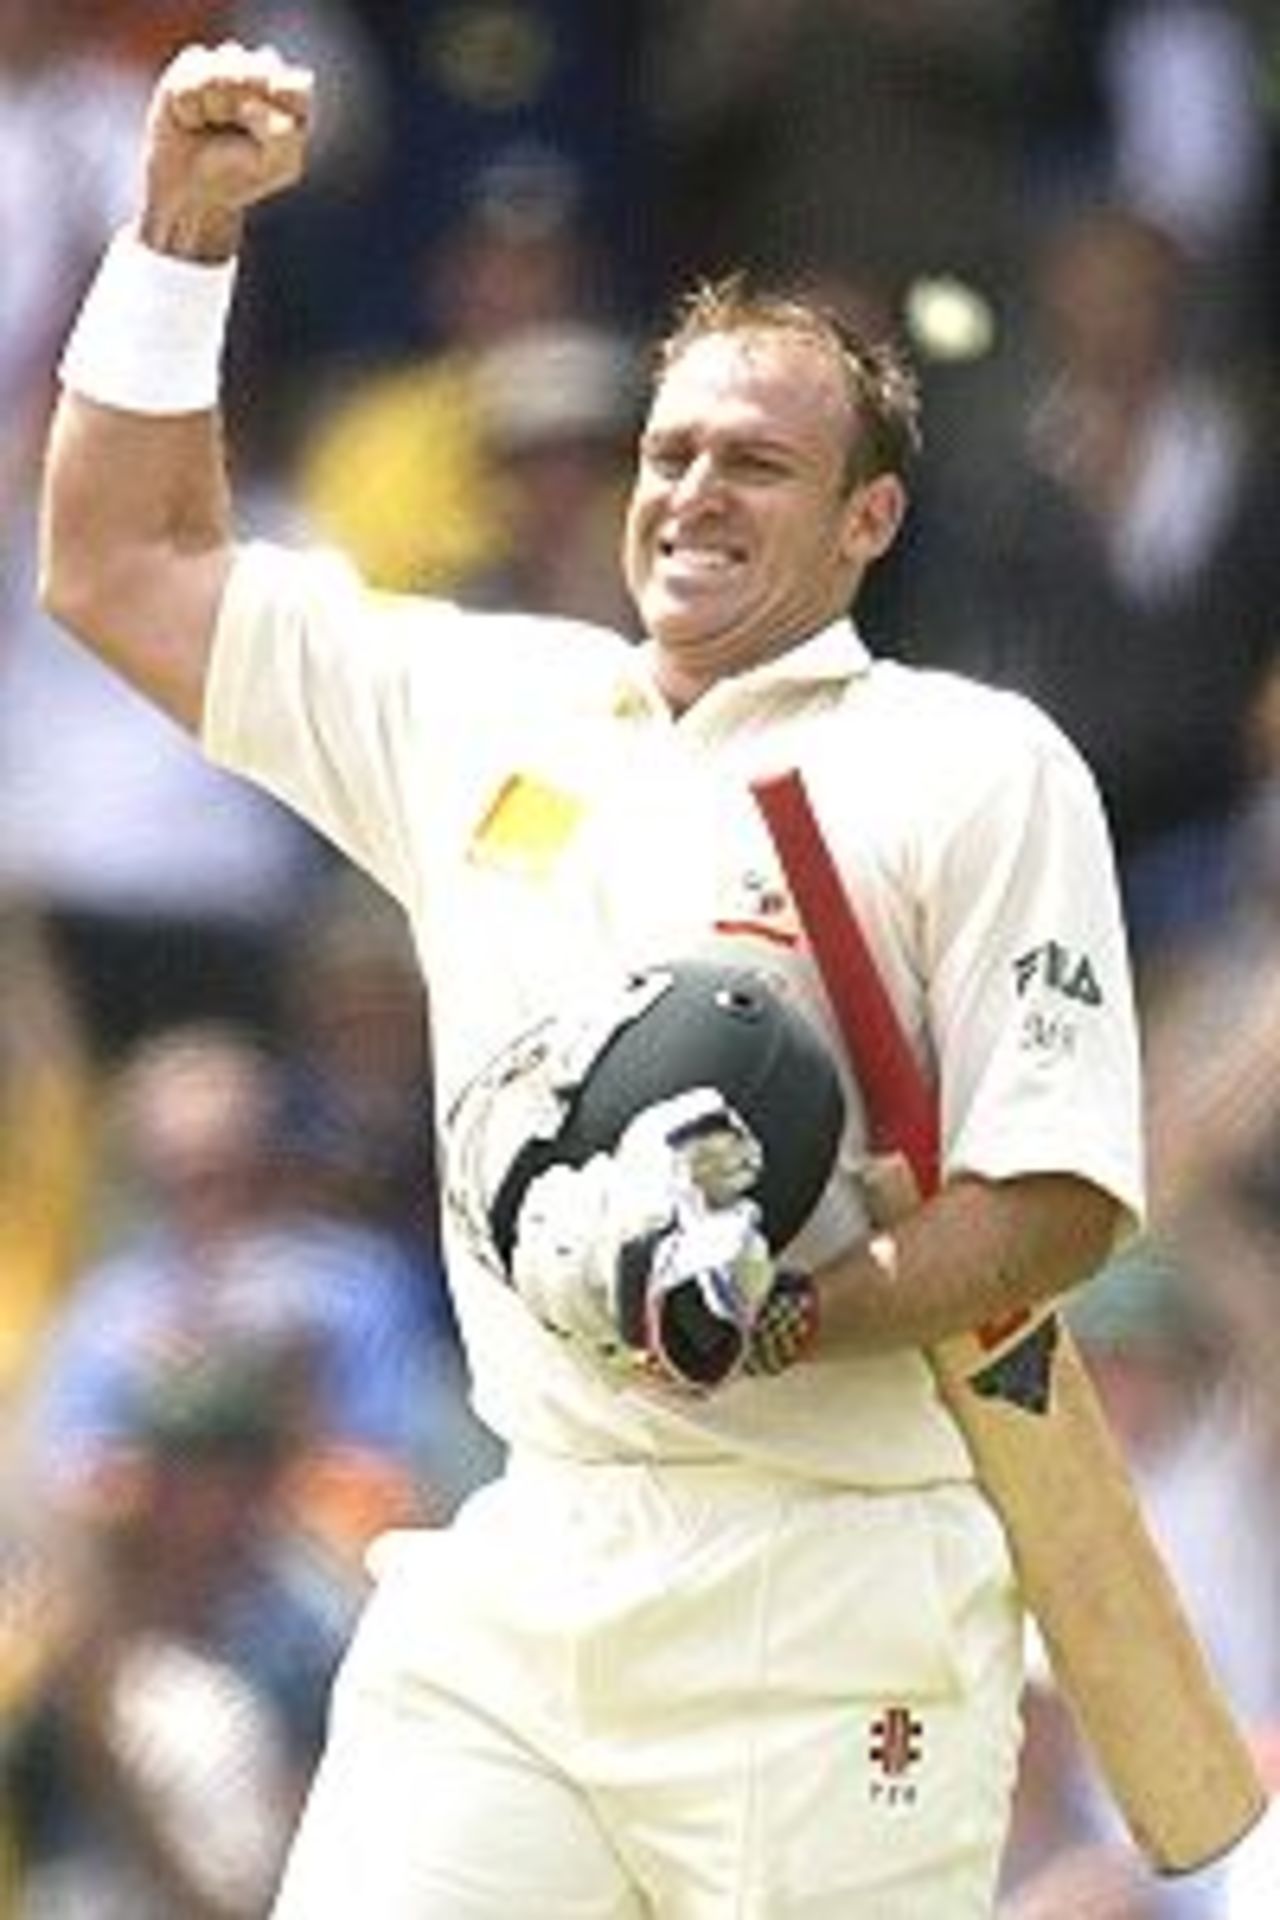 28 Dec 2001: Matthew Hayden from Australia celebrates after making a century, during the 3rd day of the Boxing Day Test match between Australia and South Africa at the Melbourne Cricket Ground in Melbourne, Australia.